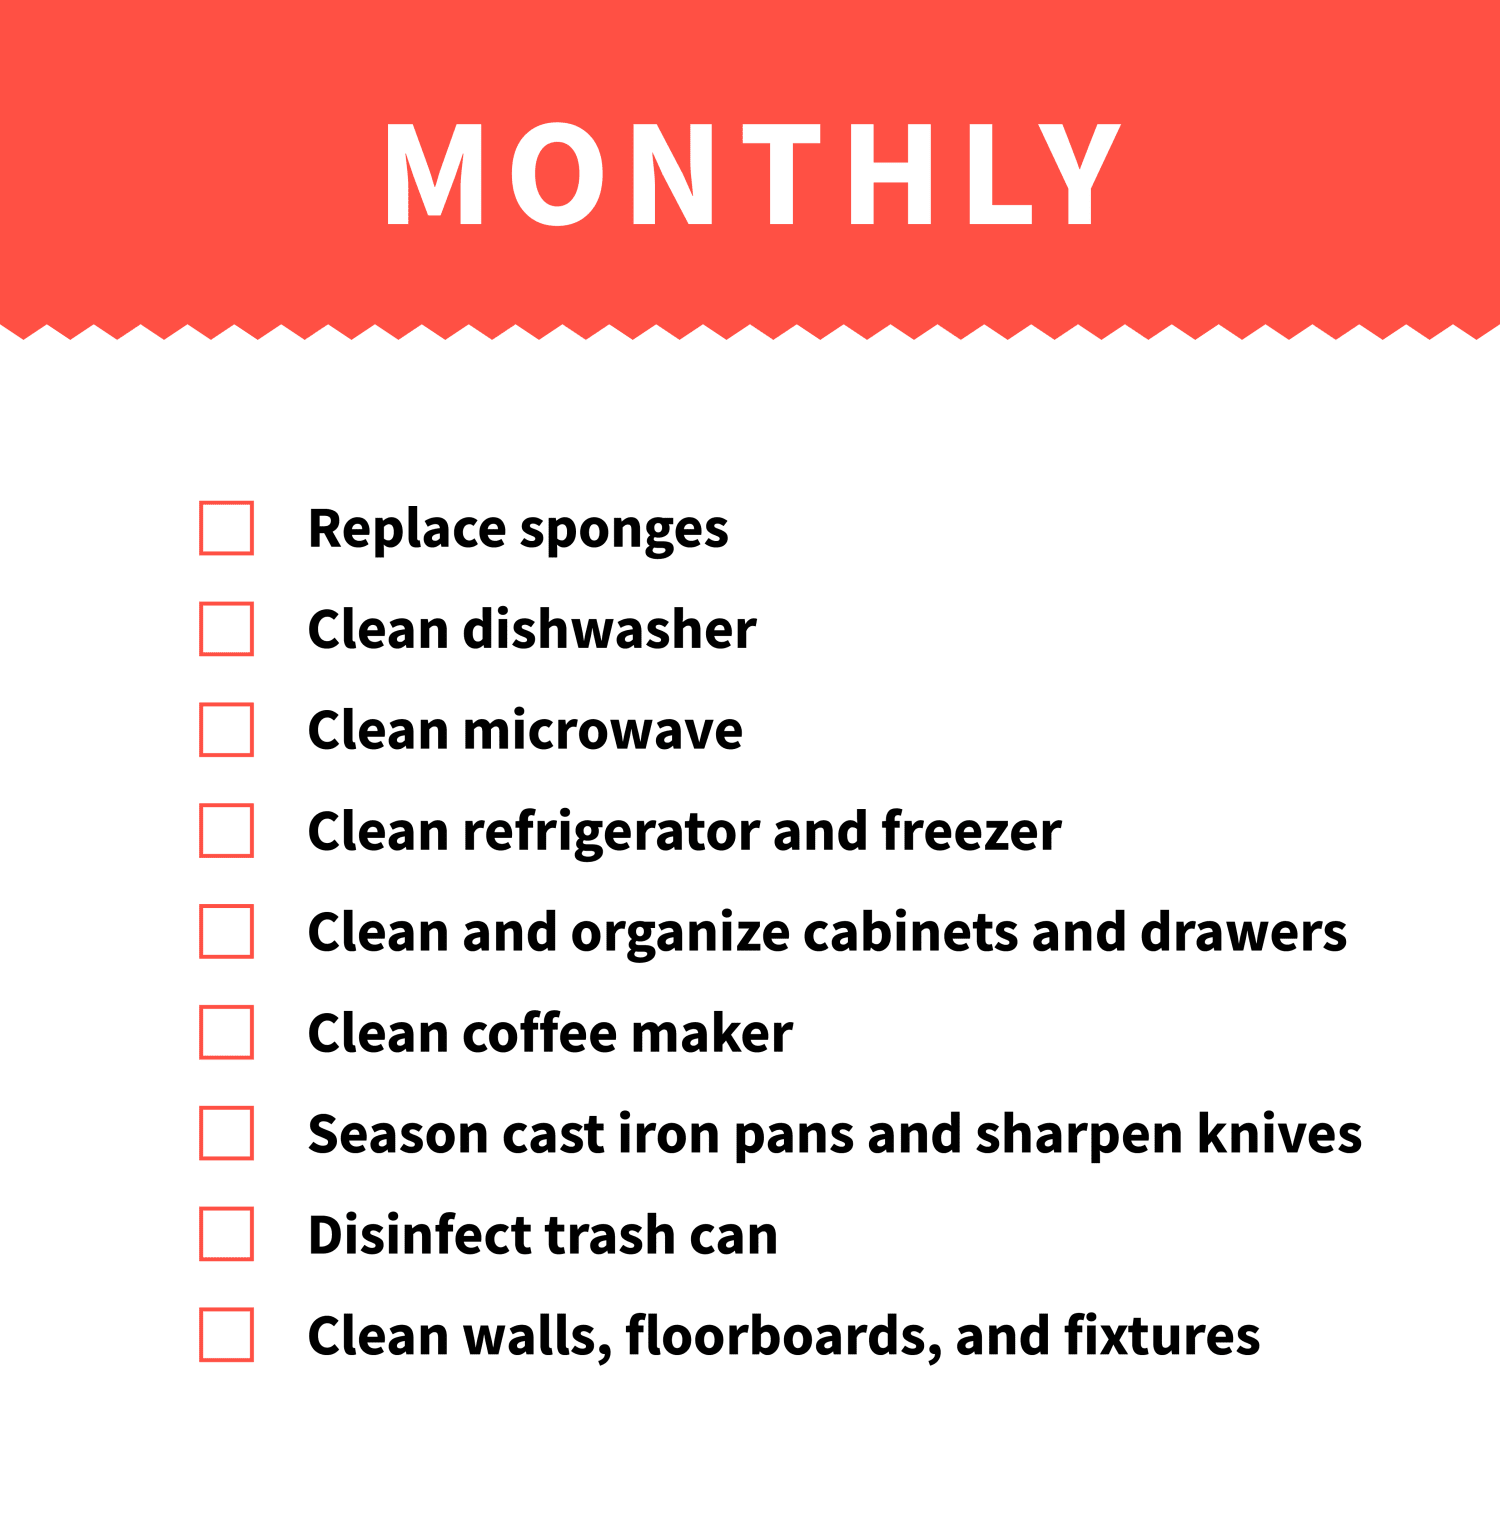 https://media-cldnry.s-nbcnews.com/image/upload/rockcms/2023-03/monthly-kitchen-cleaning-checklist-7225bf.png